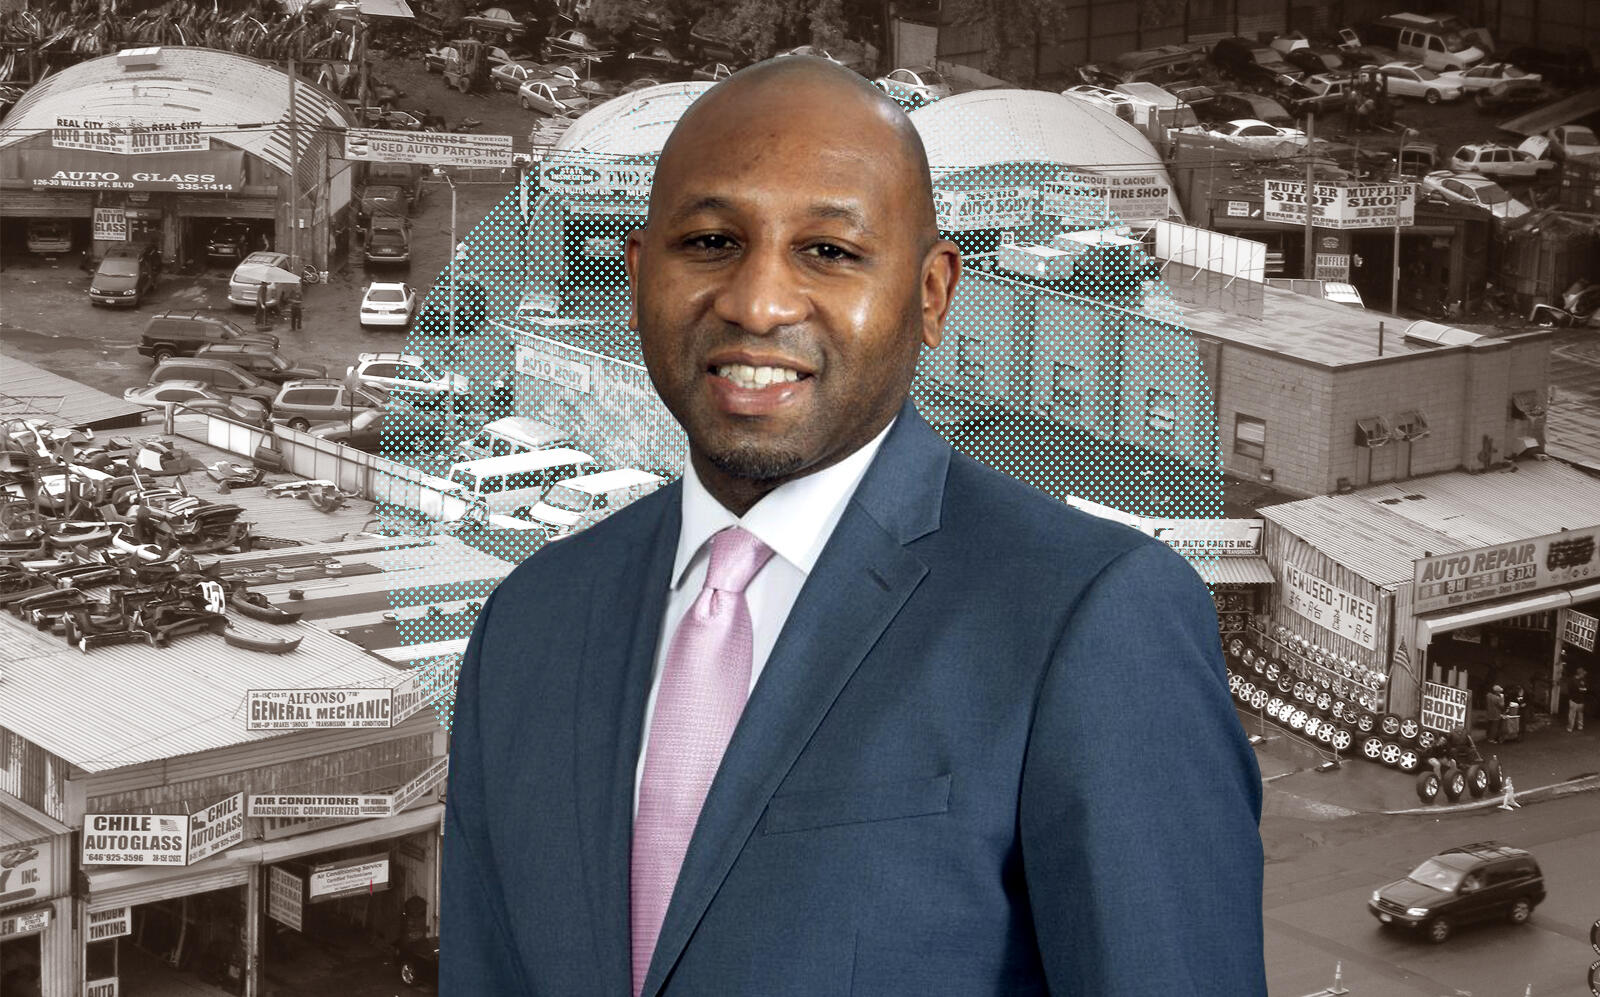 Queens Borough President Donovan Richards in front of Willets Point. (Office of Queens Borough President, WikiMedia / Jim.henderson)